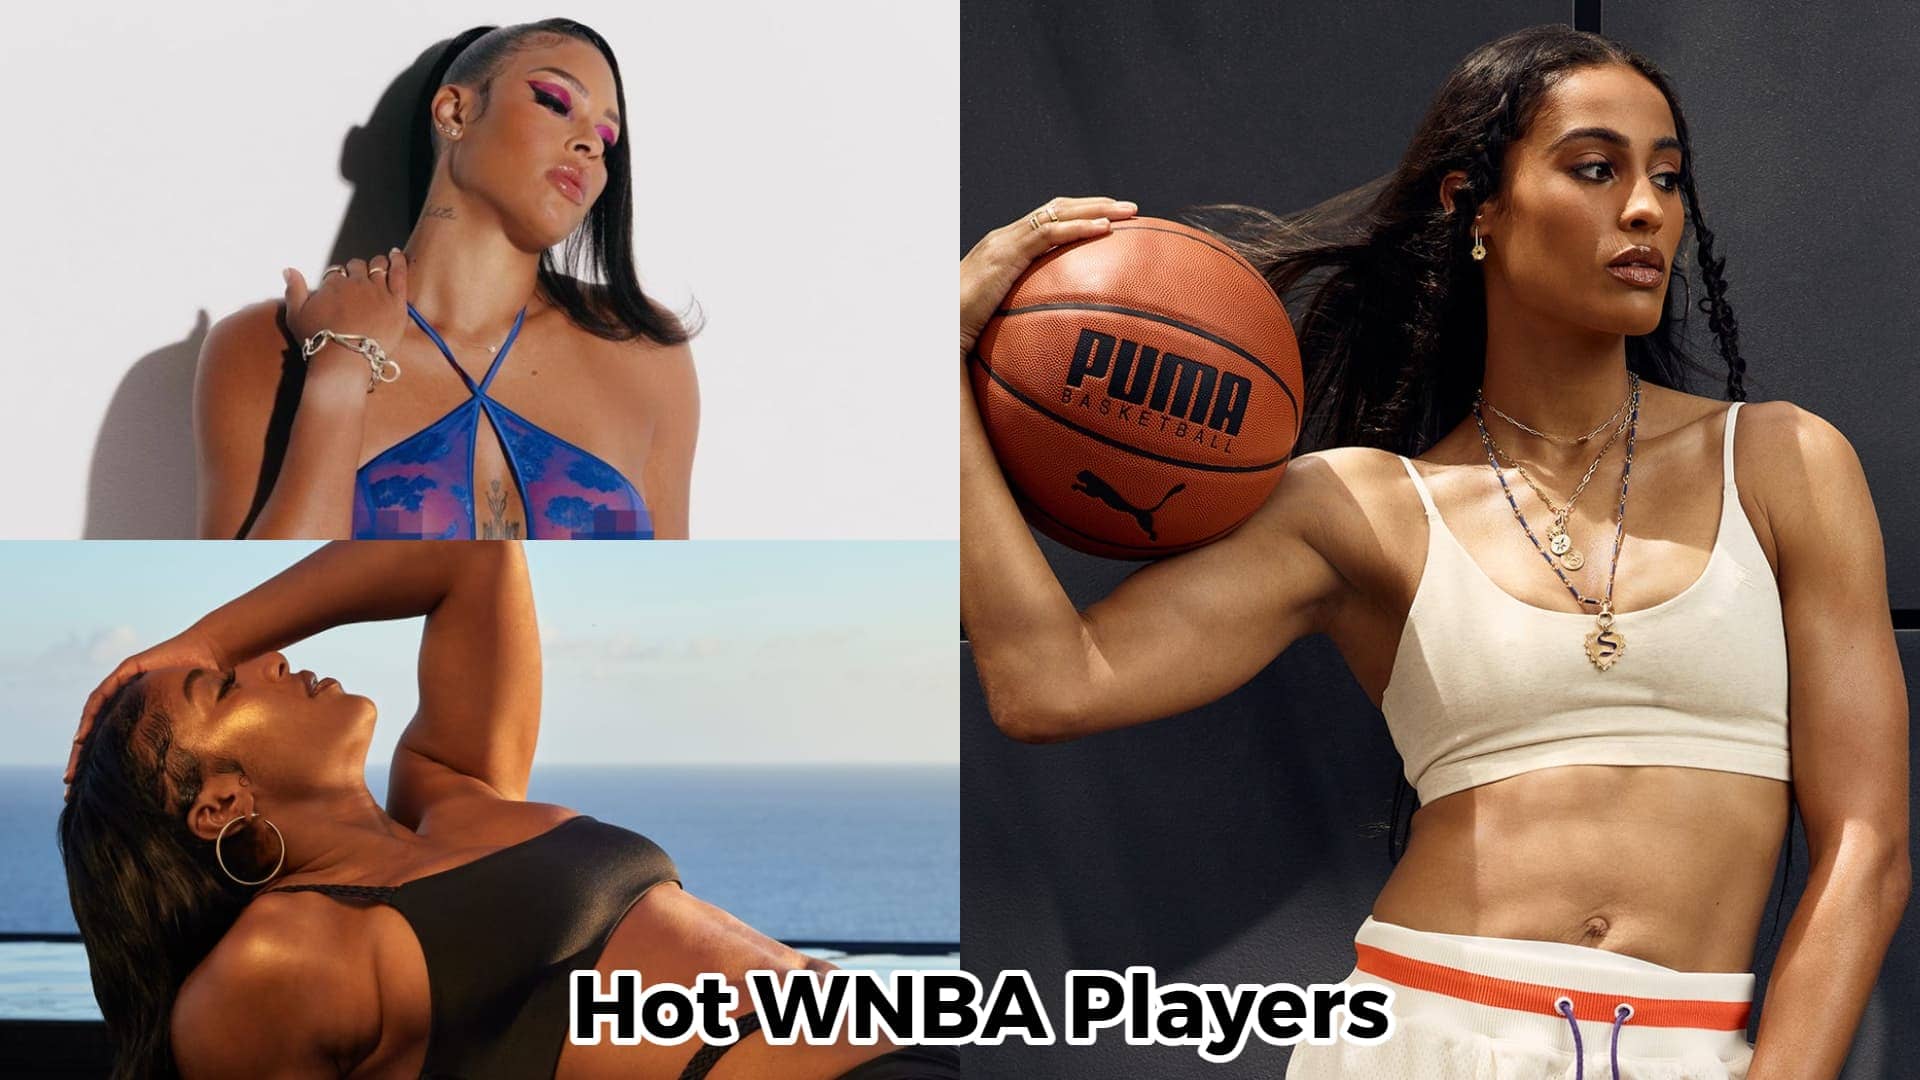 Top 15 Absolutely Hot WNBA Players In The World Now - Liz Cambage, Te’a Cooper, and Skylar Diggins-Smith